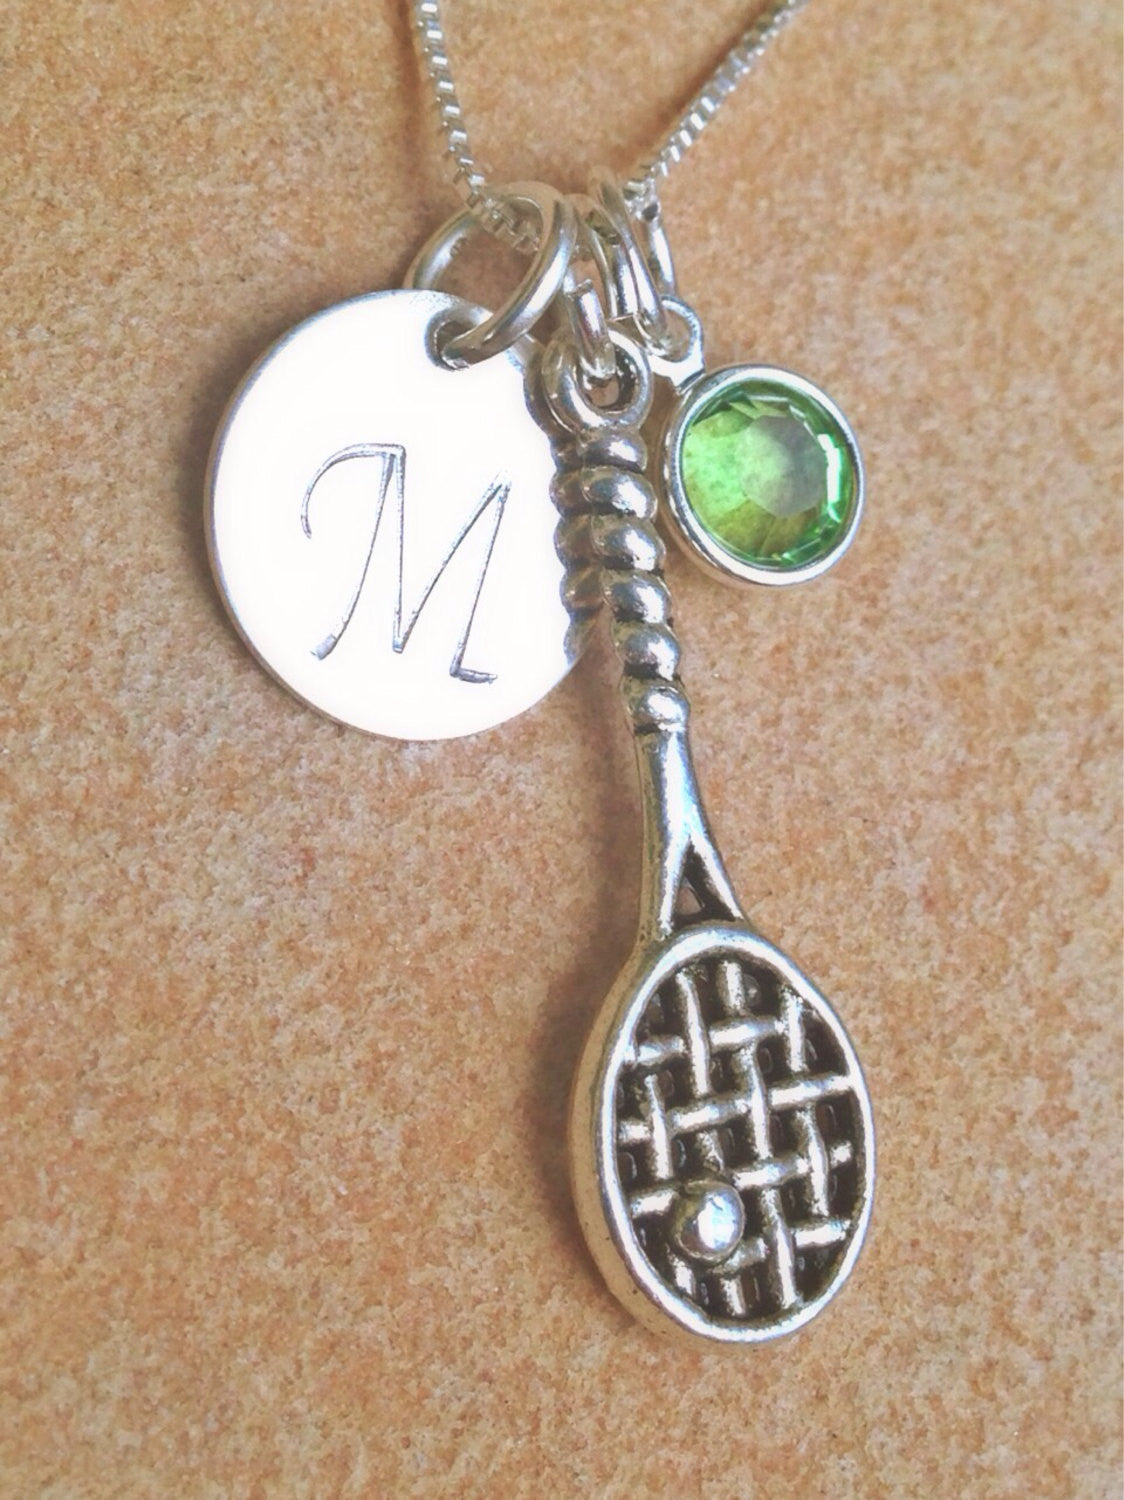 Monogram Necklace, tennis necklace, sport necklace, personalized necklace, personalized gifts, necklace, natashaaloha, tennis - Natashaaloha, jewelry, bracelets, necklace, keychains, fishing lures, gifts for men, charms, personalized, 